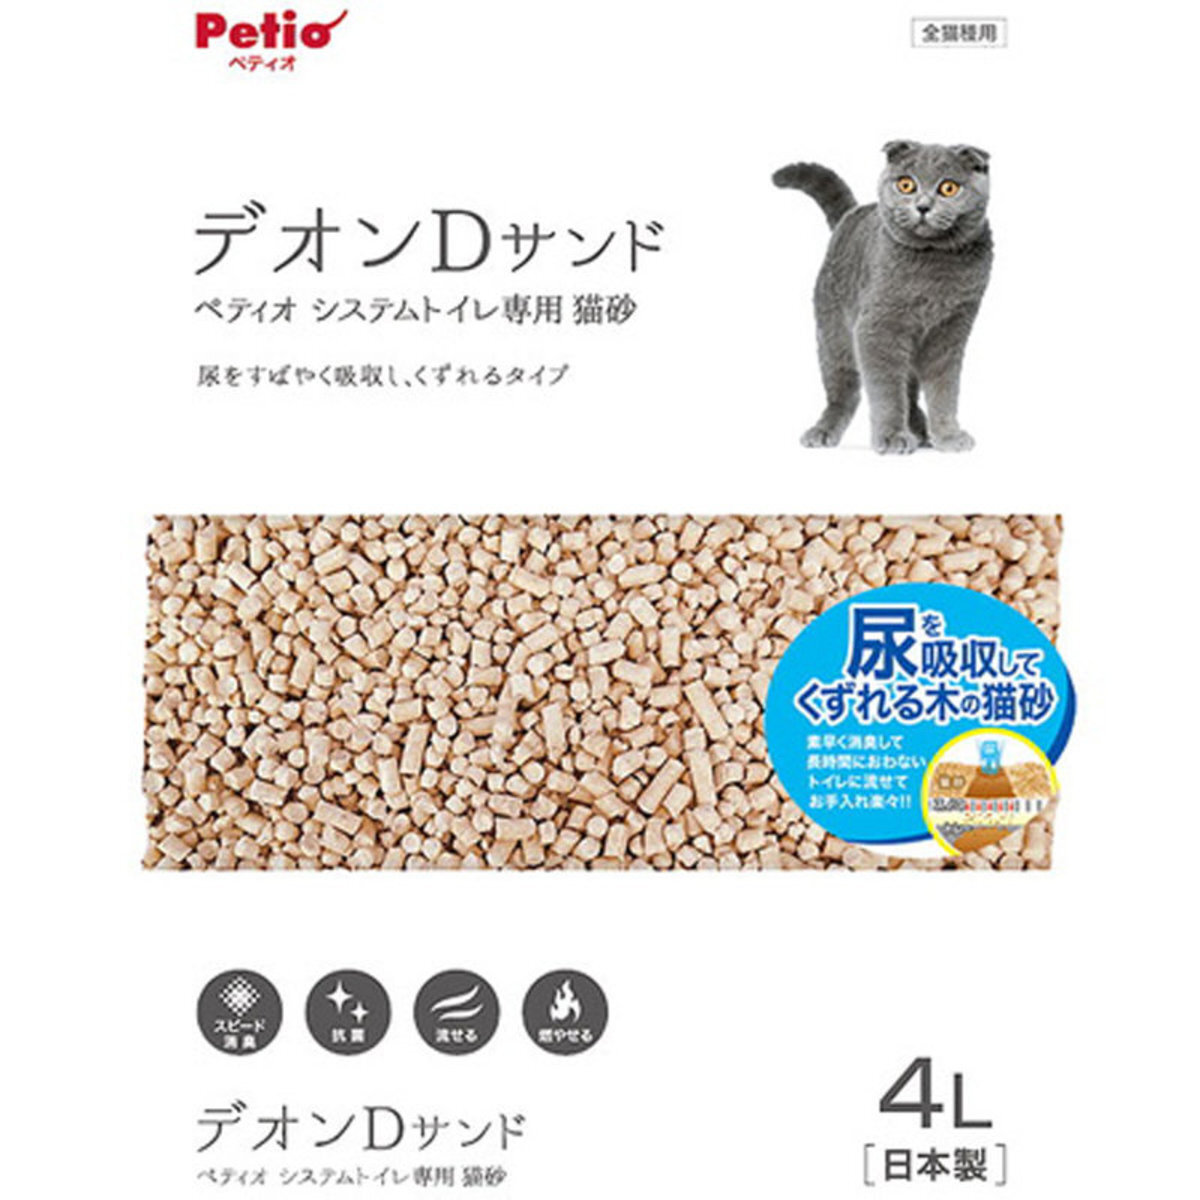 Cat Litter for Petio System Toilet  4L #F142（W26221）